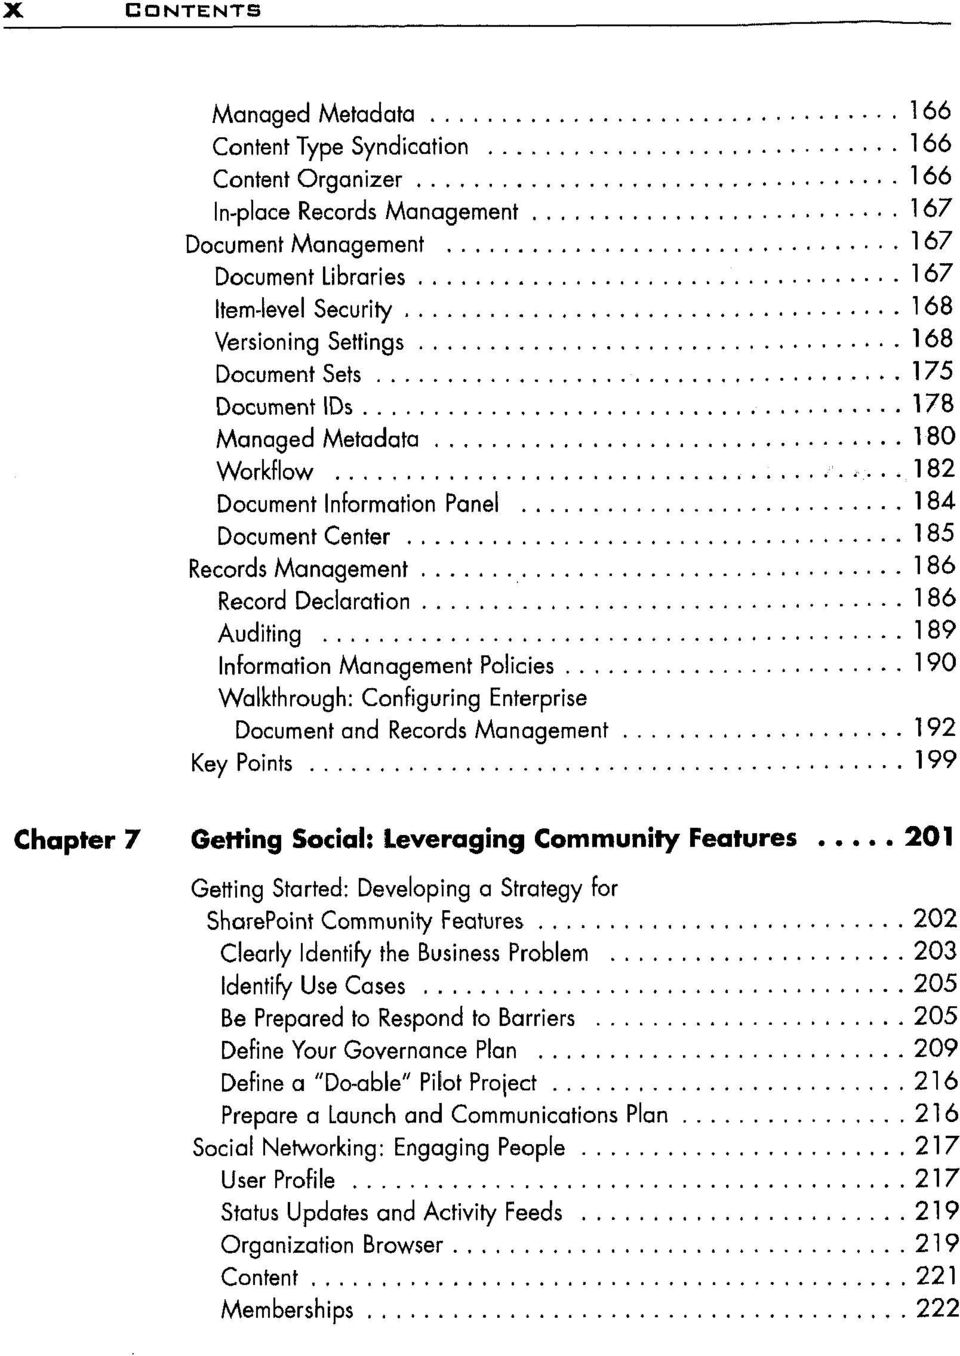 Information Management Policies 190 Walkthrough: Configuring Enterprise Document and Records Management 192 Key Points 199 Chapter 7 Getting Social: Leveraging Community Features 201 Getting Started: